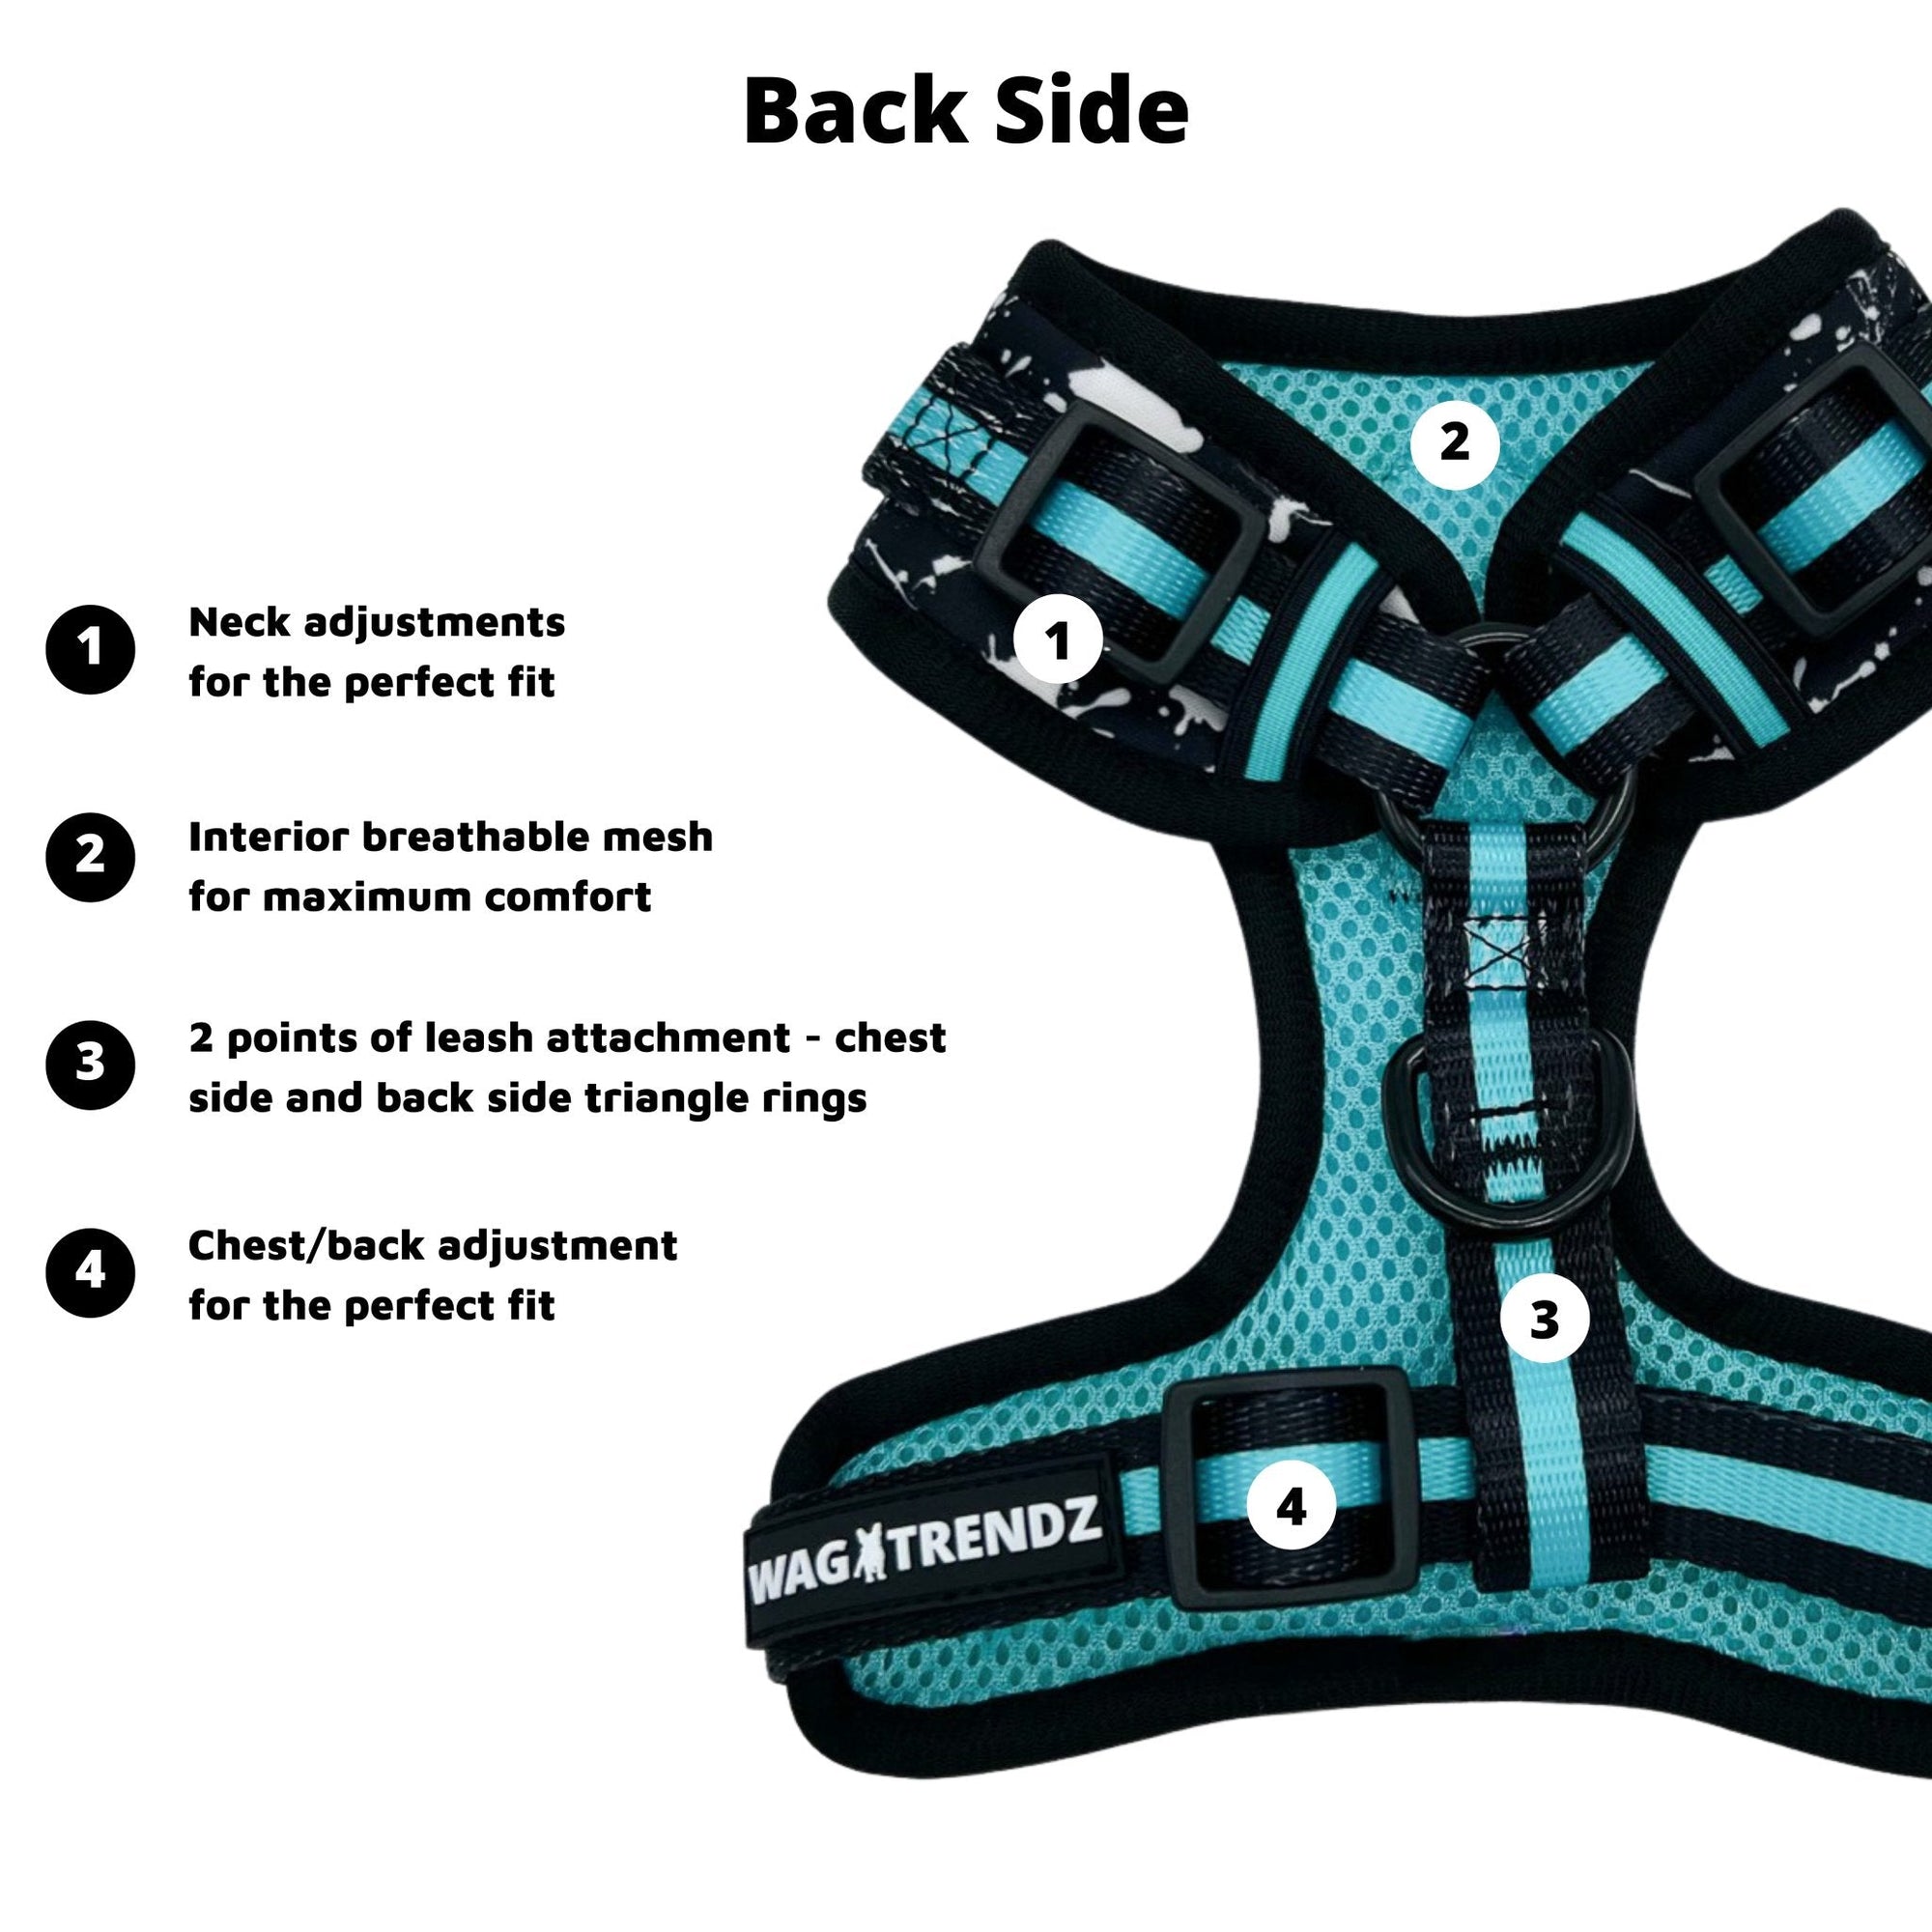 No Pull Dog Harness - black adjustable harness with white paint splatter and teal accents with product feature captions - against a solid white background - Wag Trendz